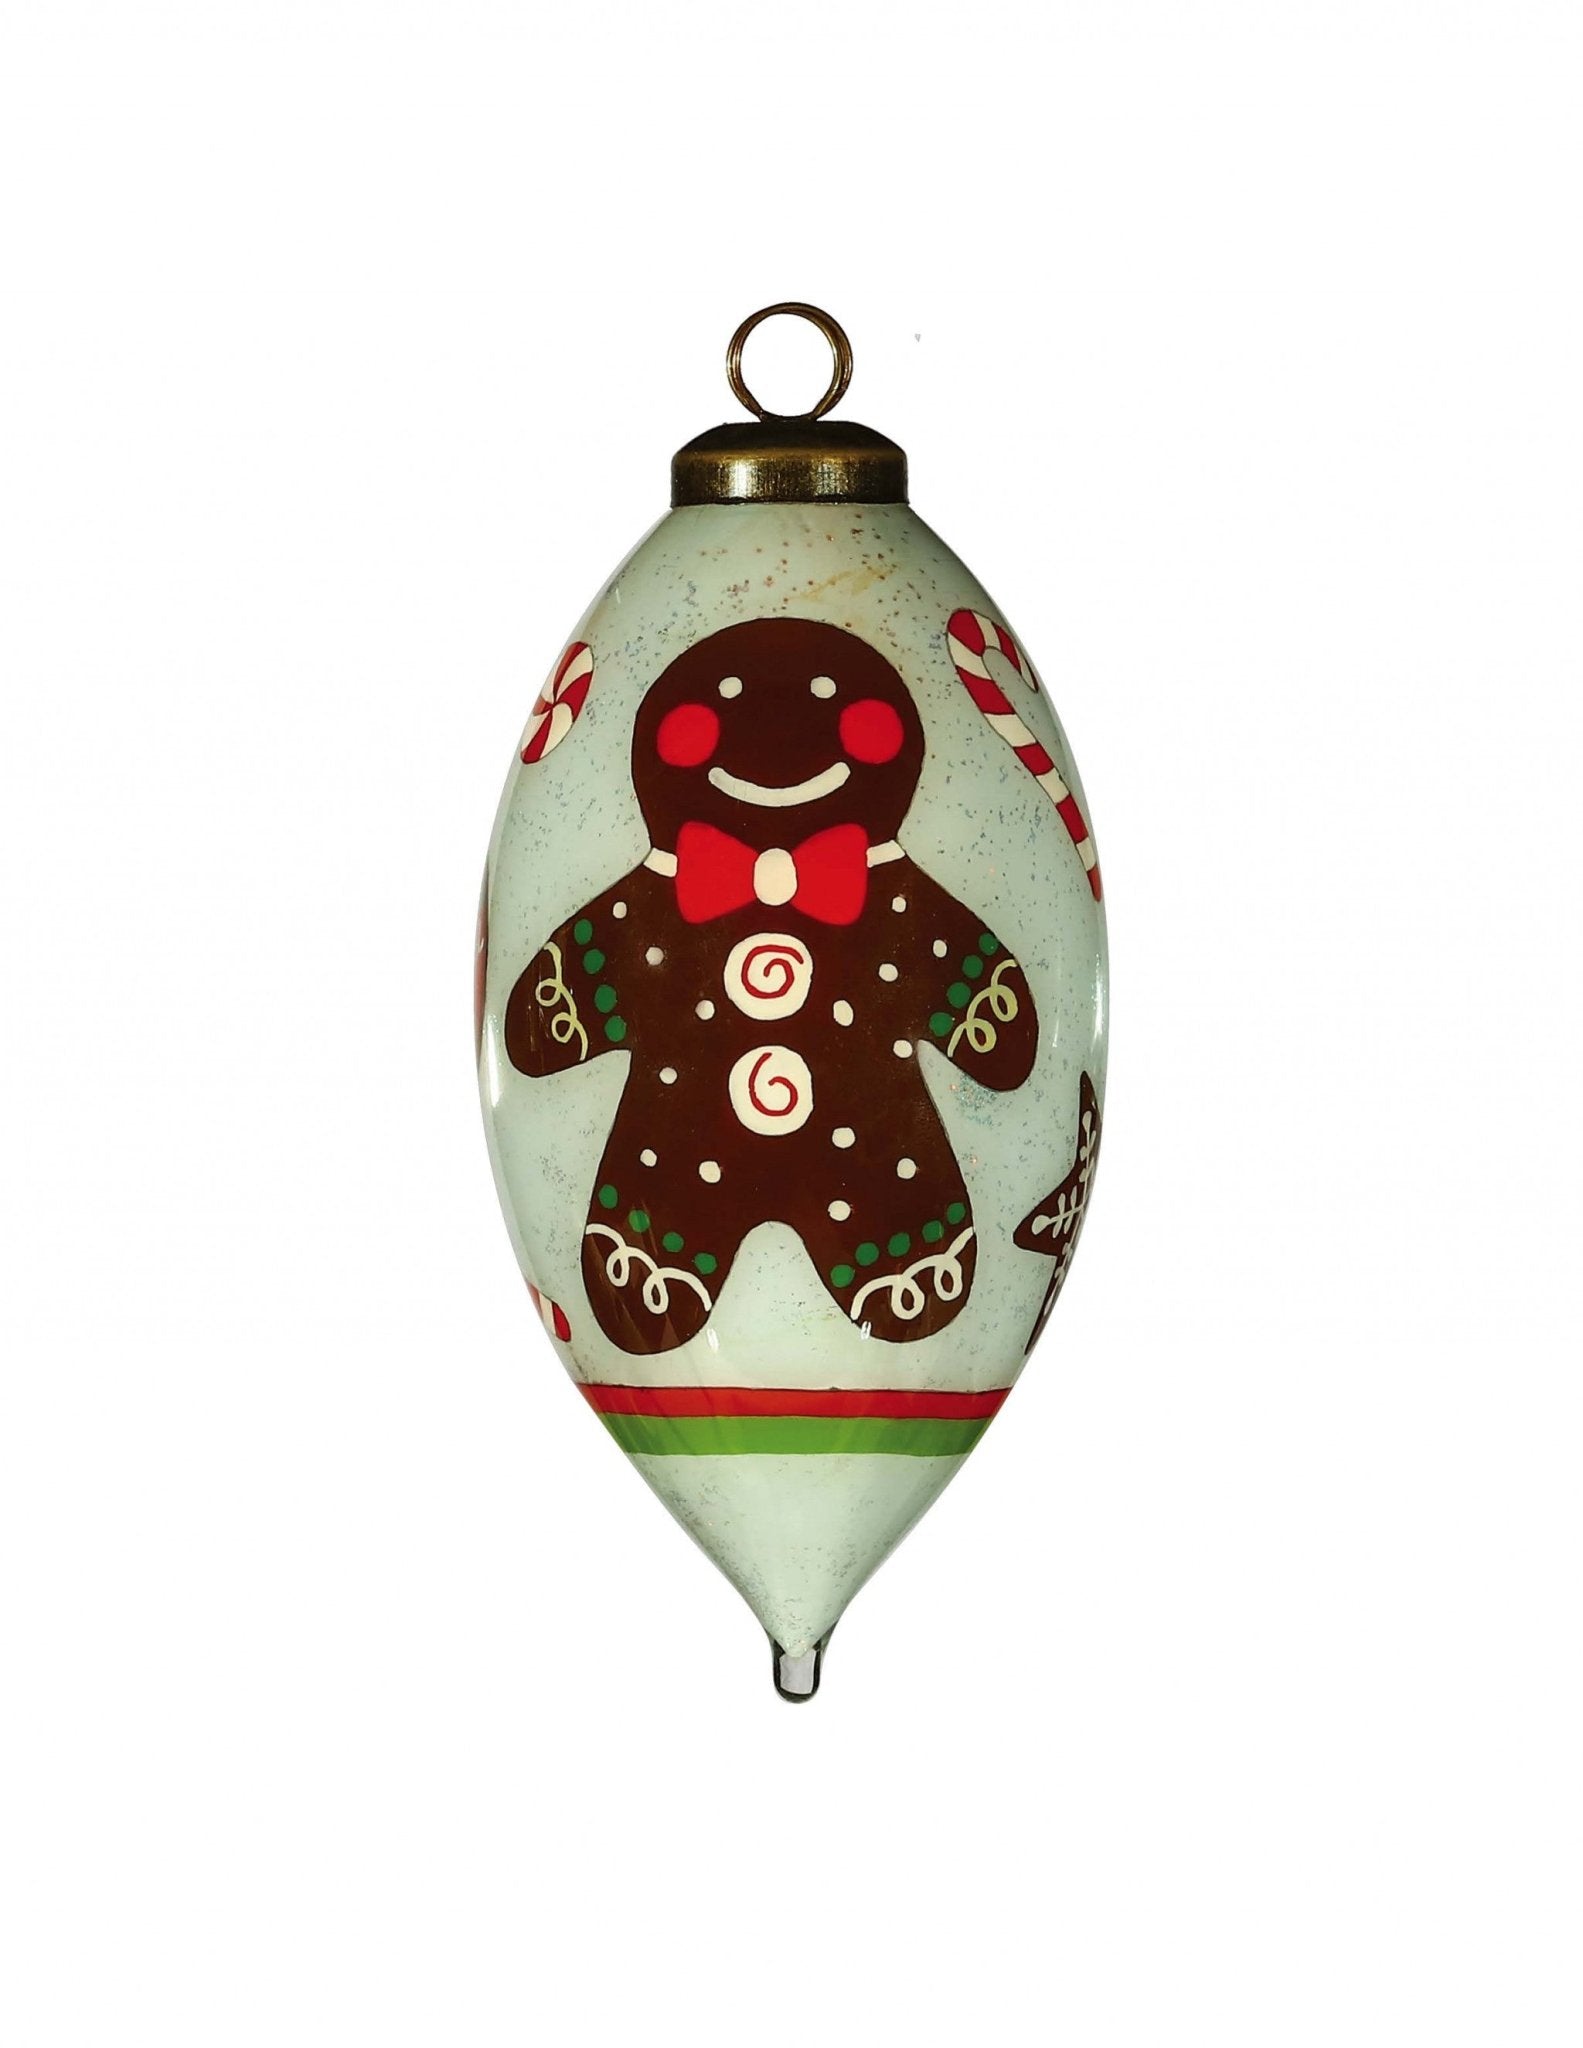 Festive-Glitter-Gingerbread-Man-Hand-Painted-Mouth-Blown-Glass-Ornament-Christmas-Ornaments